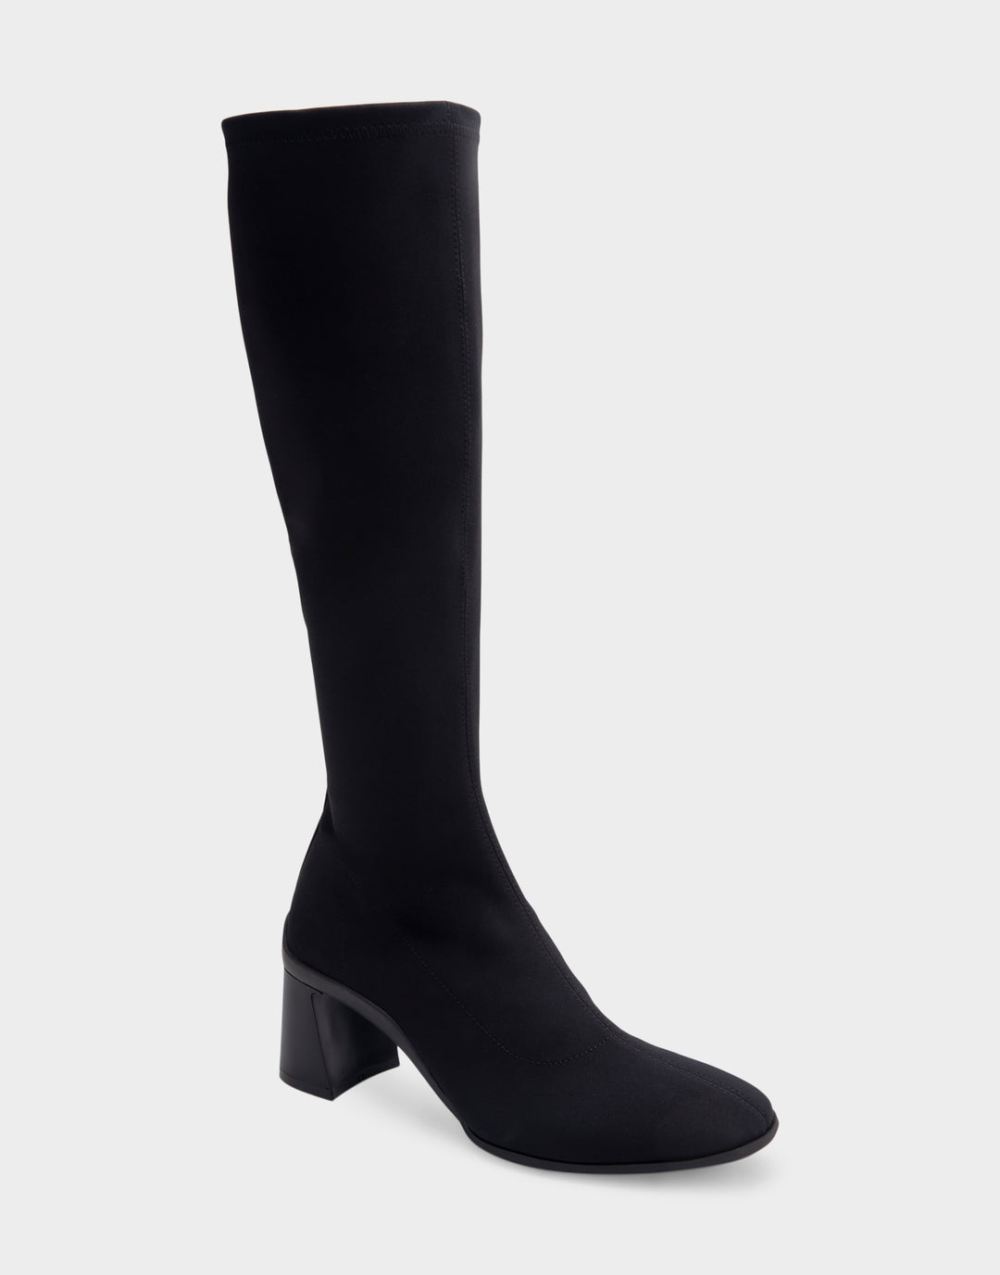 Women's | Centola Black Stretch Faux Suede Sculpted Heel Tall Shaft Boot